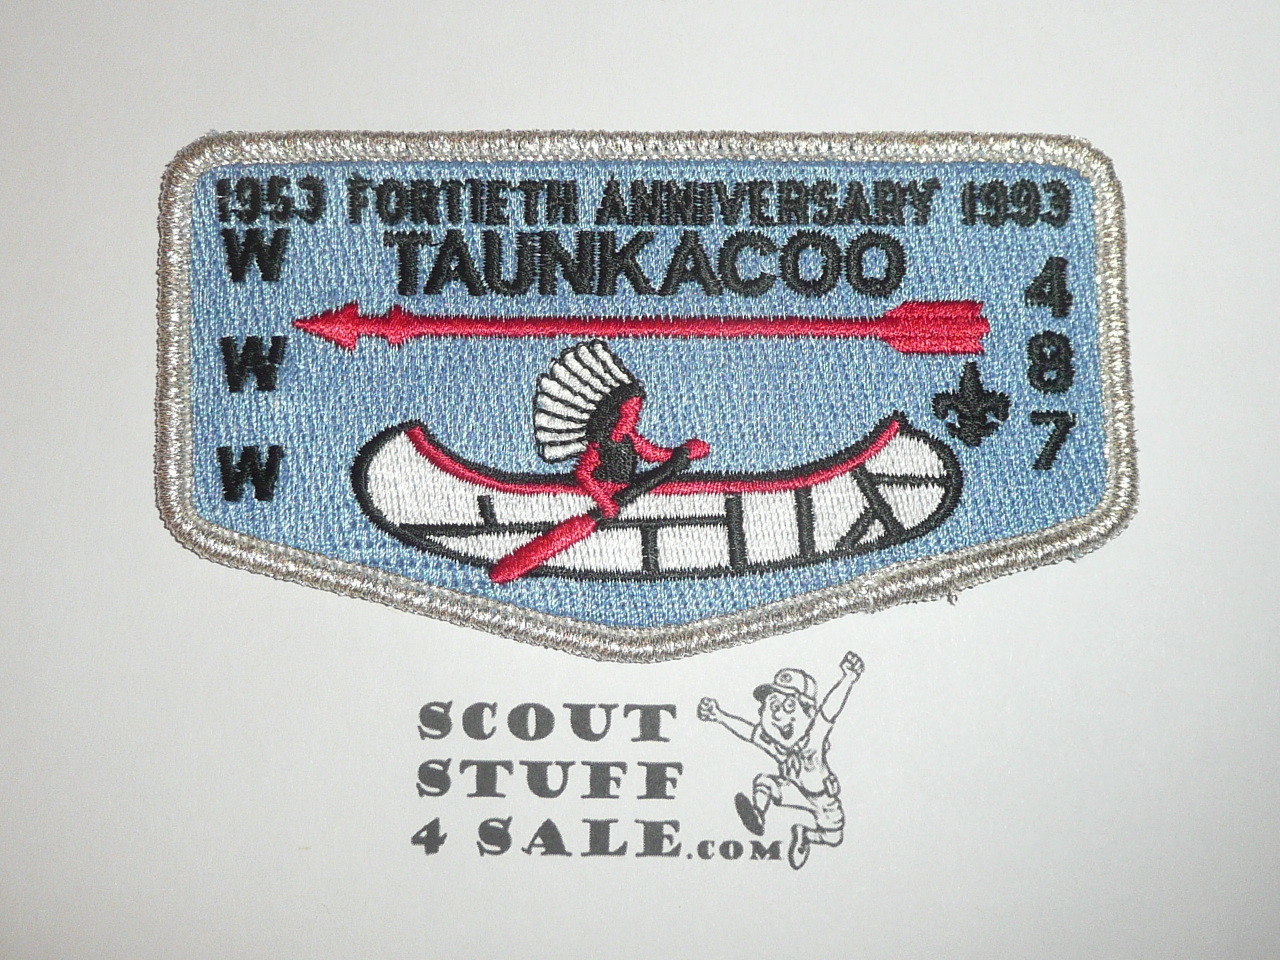 Order of the Arrow Lodge #487 Taunkacoo s5 40th Anniversary Flap Patch